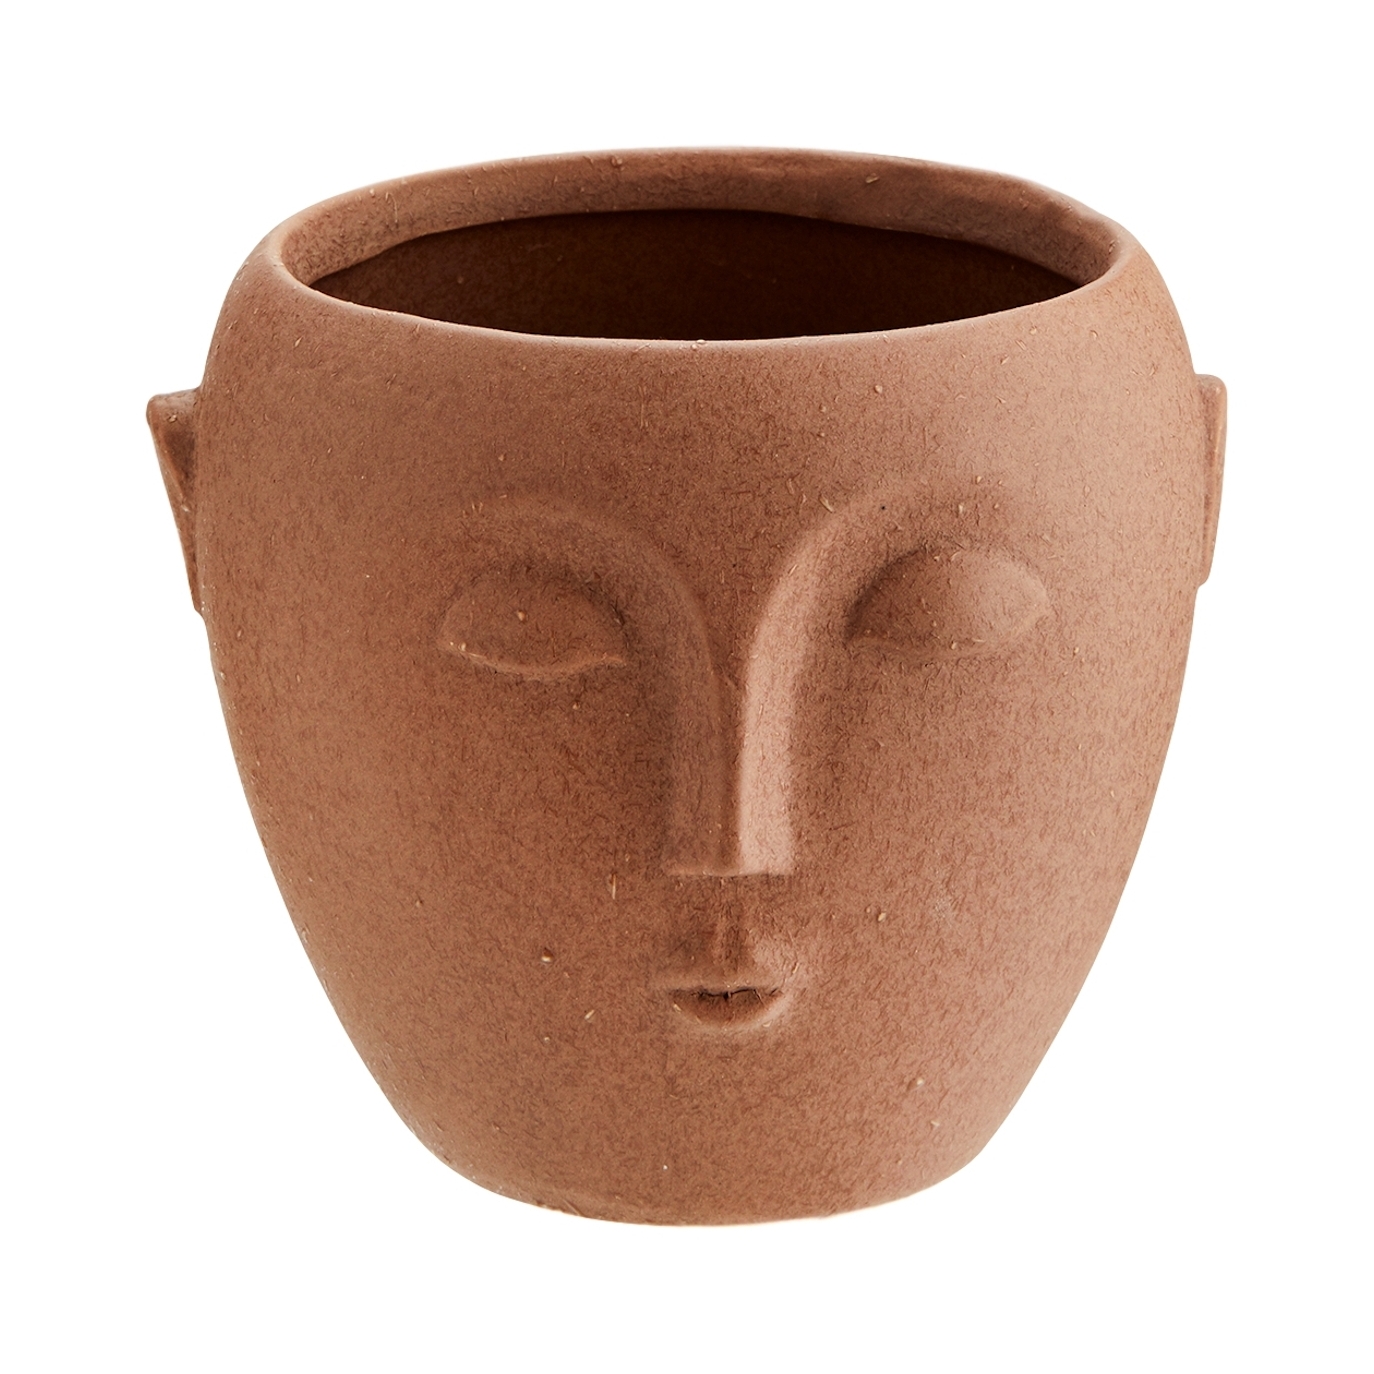 Madam Stoltz - Flower Pot With Face Imprint Brown 14x12 - Vases & decorative objects - HY14827-13 